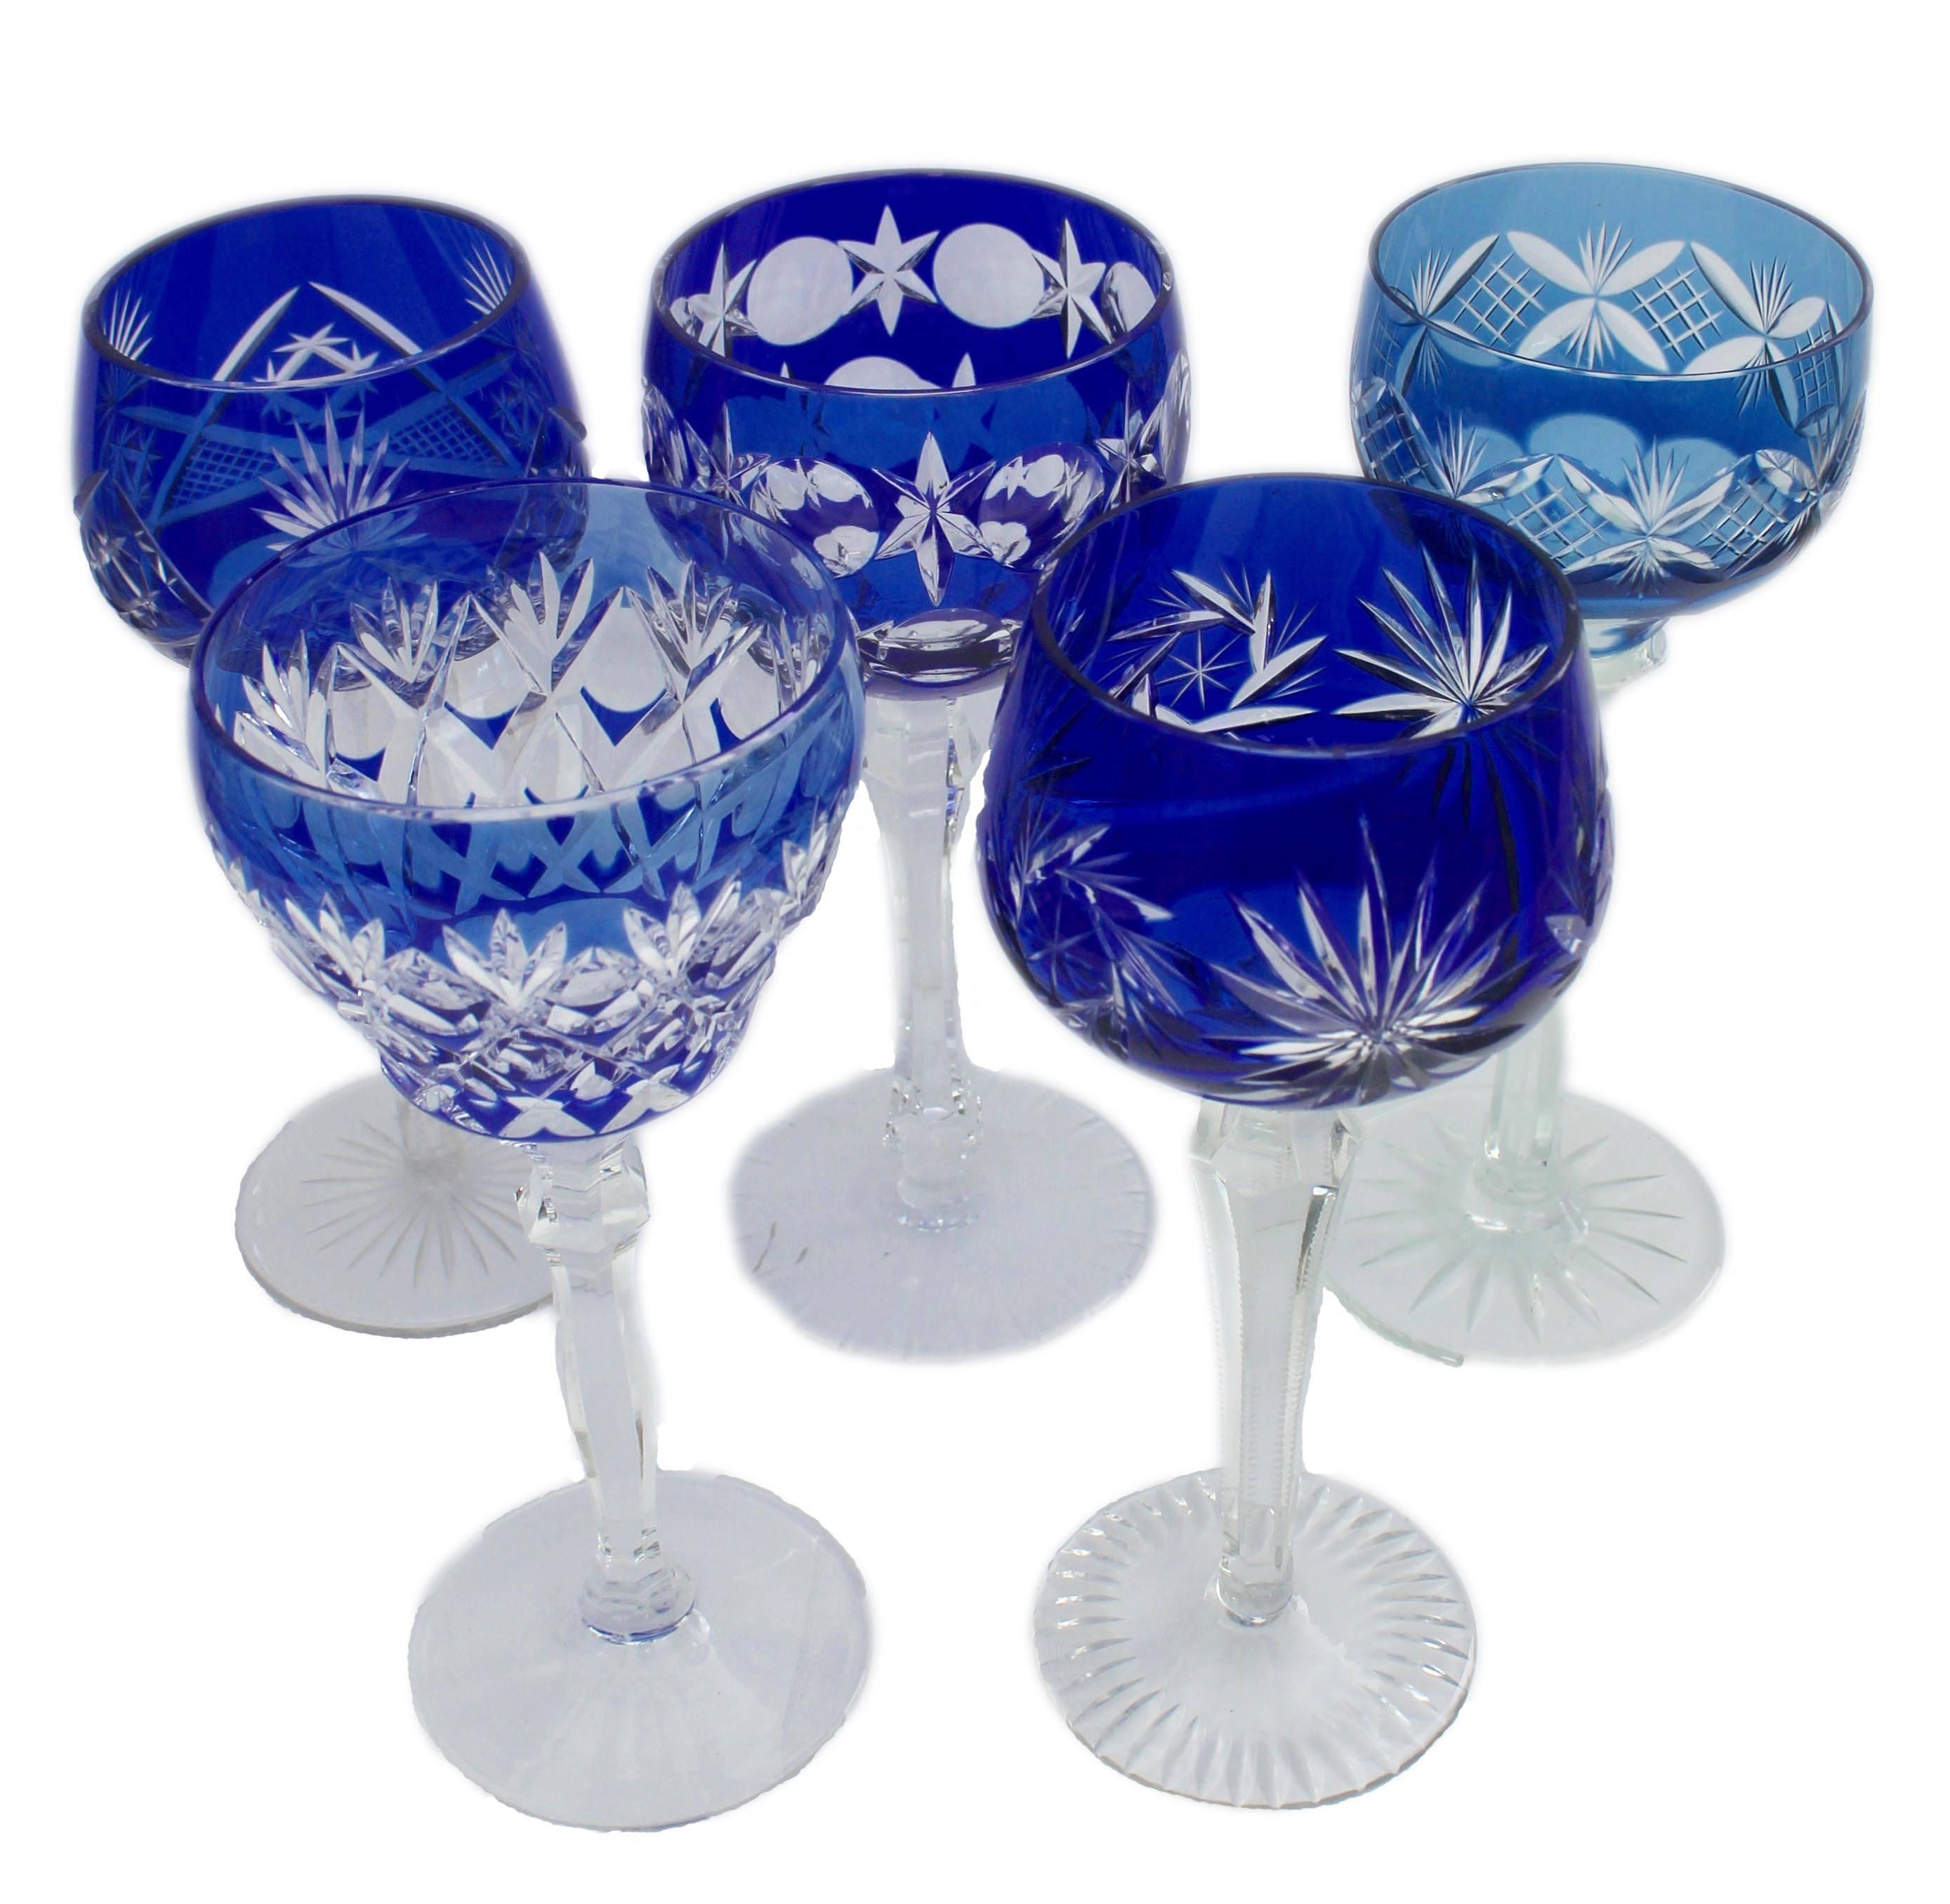 Overlay stemmed glasses

Collection of 21 heavy cut crystal stemmed goblets.
Each is overlaid in colored and cut back to clear 
Made in Germany
Different sizes on average height 8 inch, width 3 inch

They are handblown and heavy cut lead crystal in